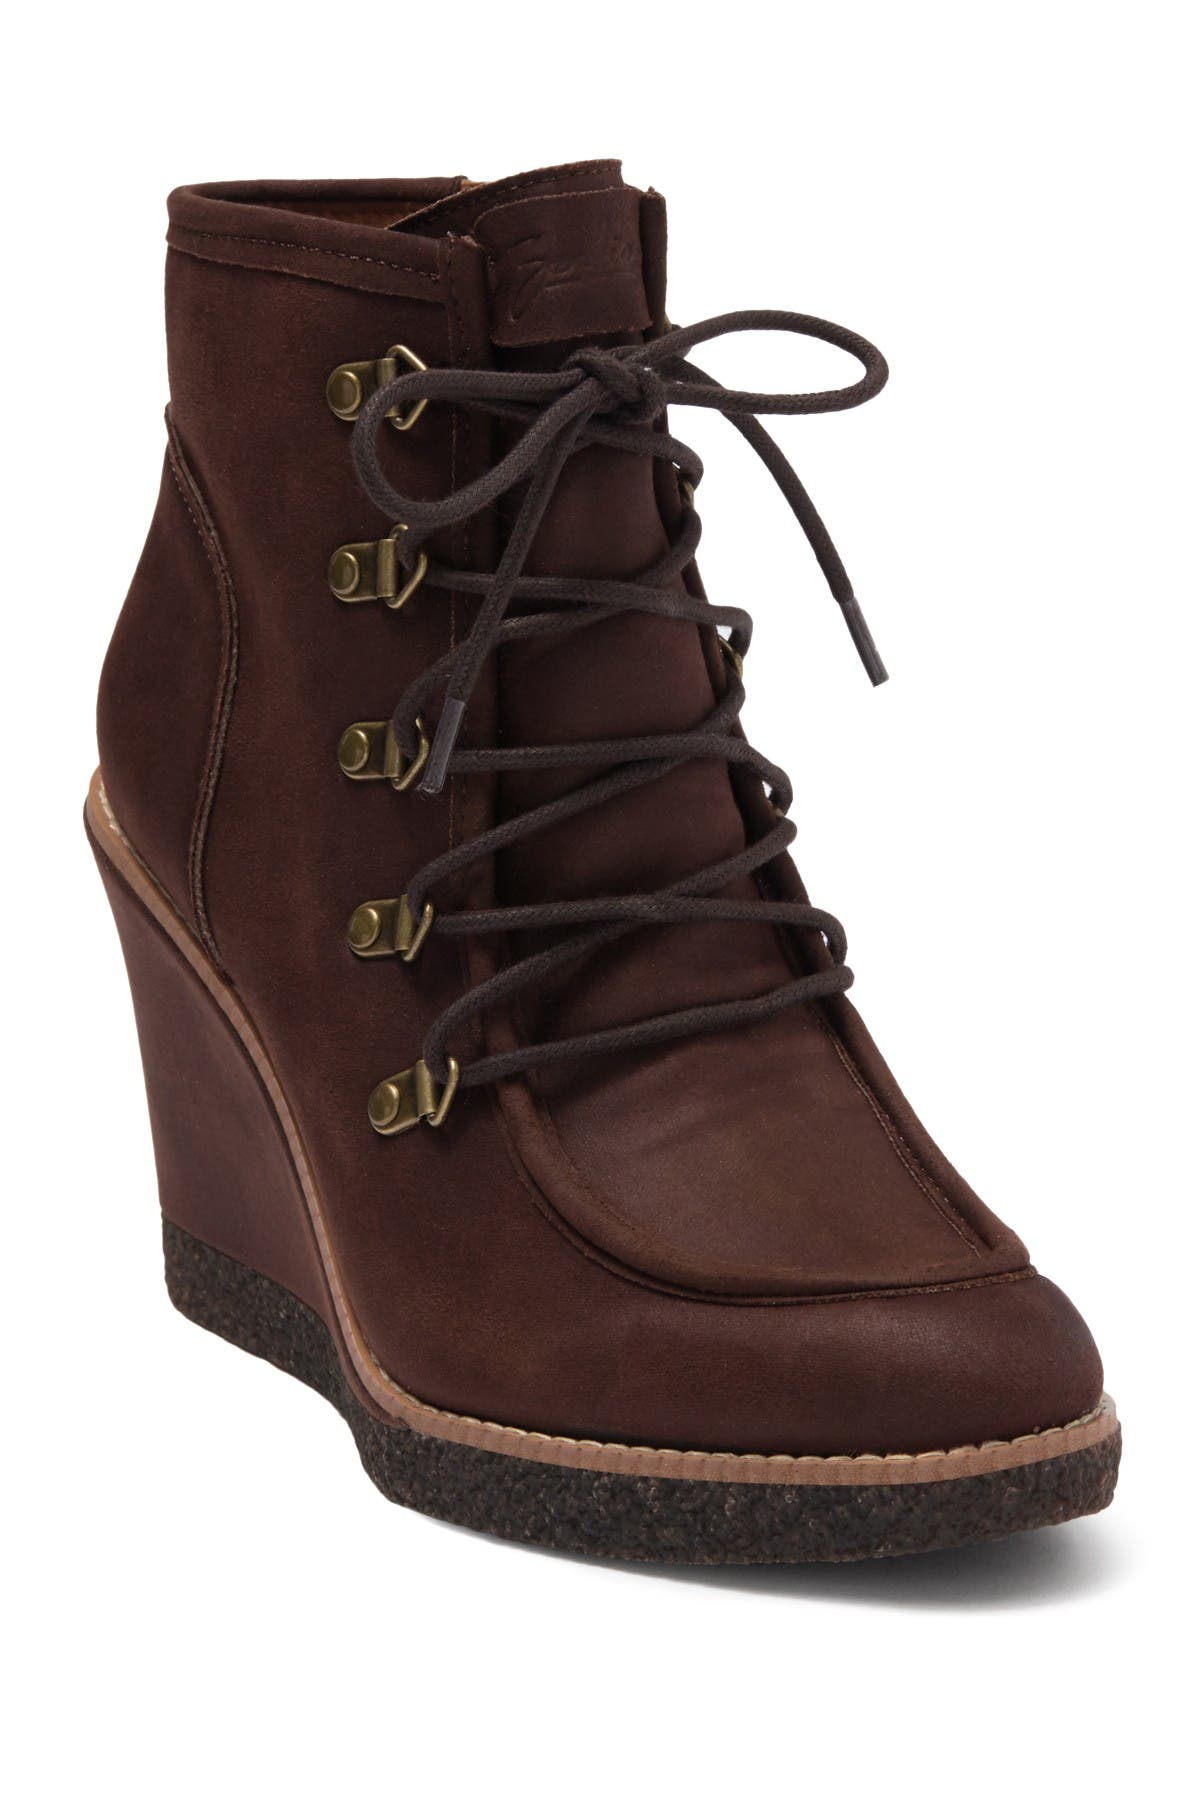 Zodiac | Indy Lace-Up Wedge Boot | Nordstrom Rack